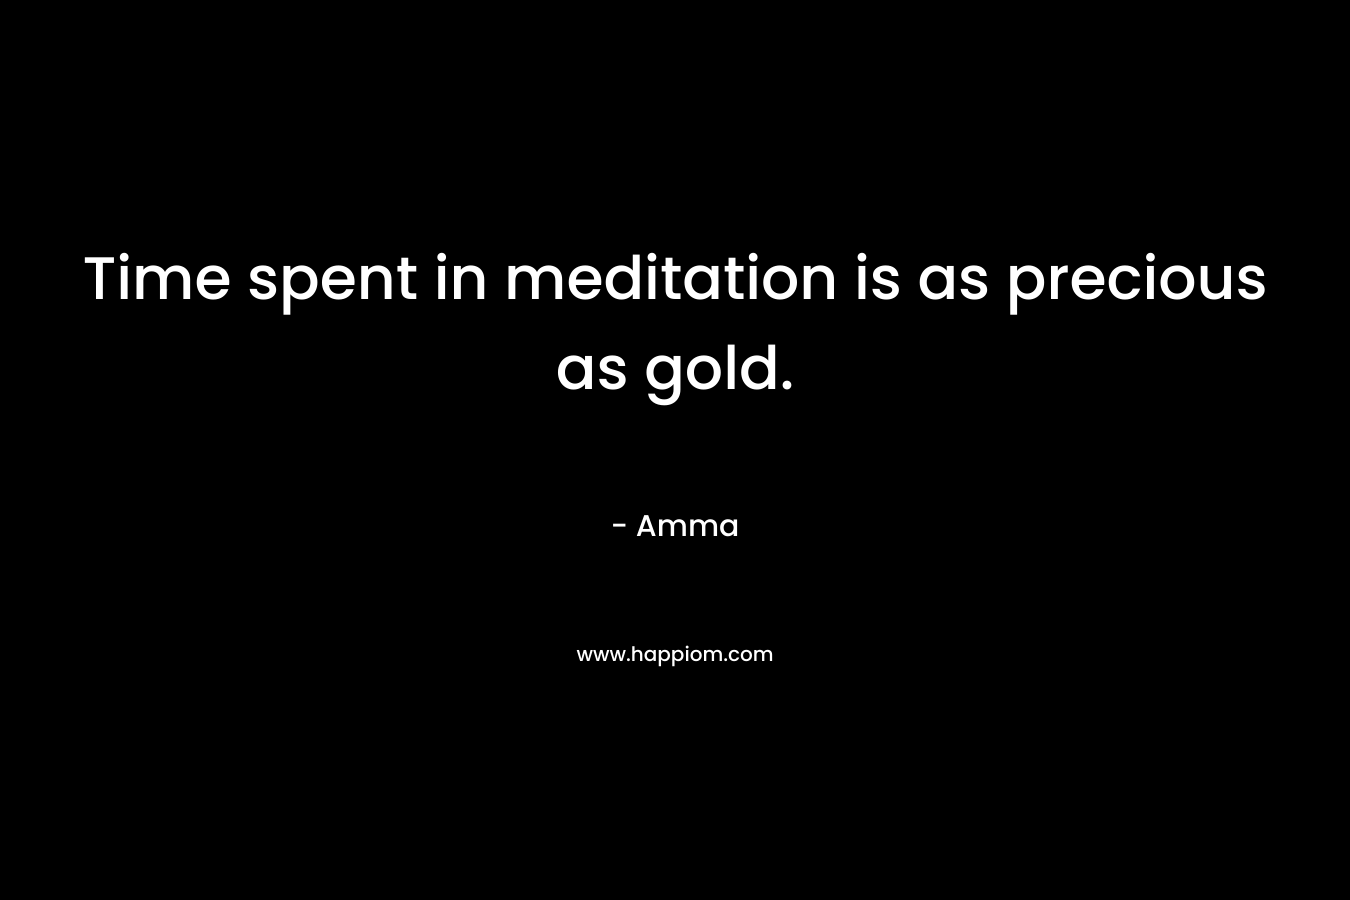 Time spent in meditation is as precious as gold.